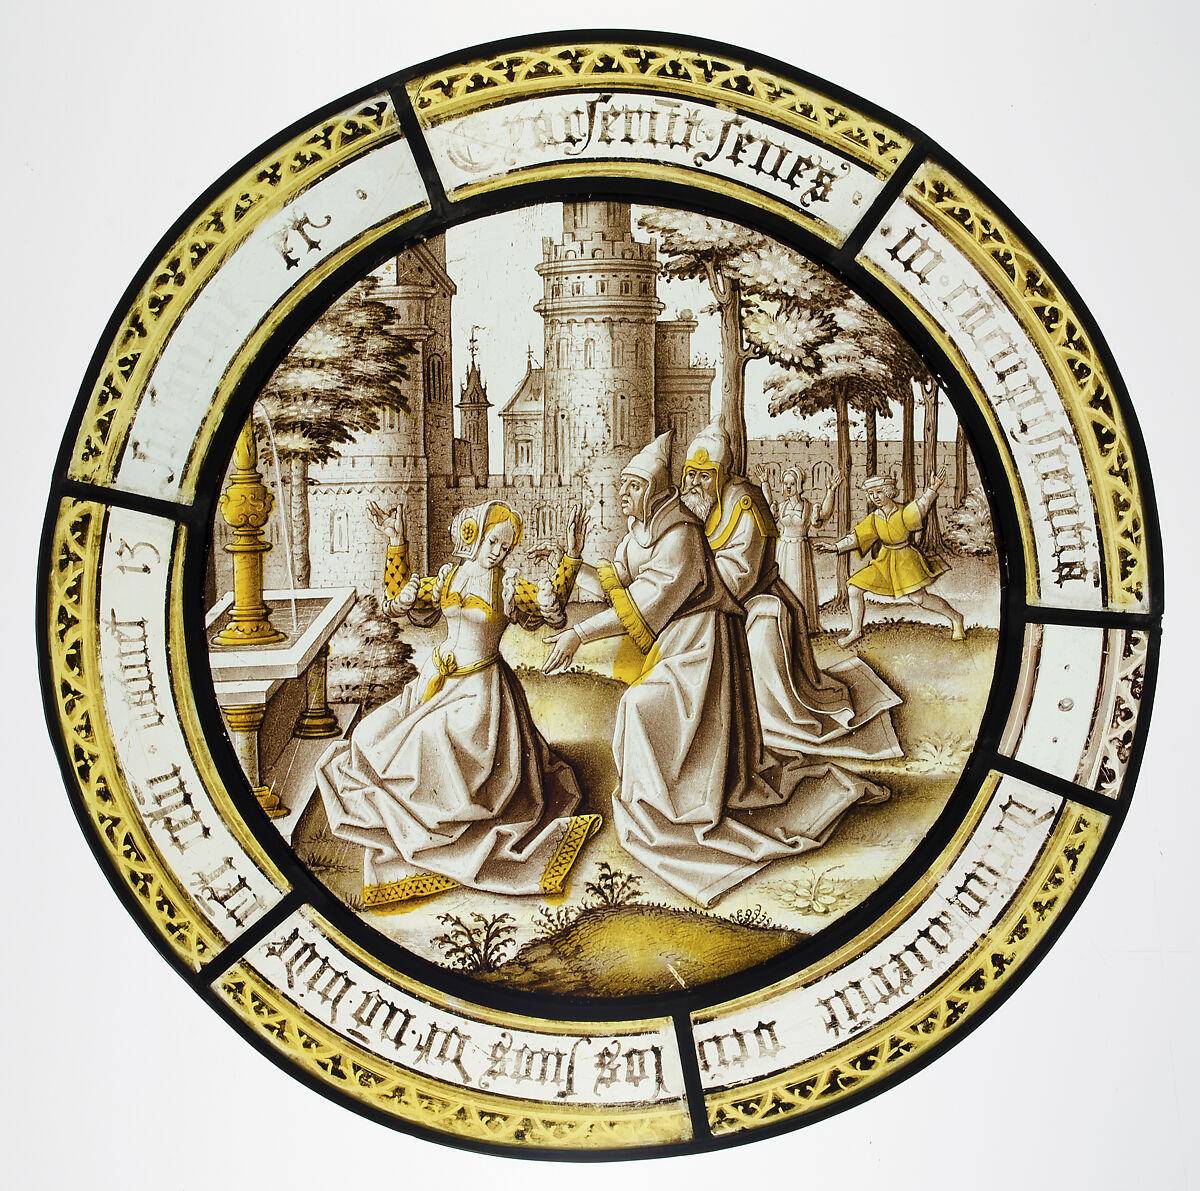 Roundel with Susannah and The Elders, Based on a design by Pseudo-Ortkens (South Netherlandish, active Antwerp and Brussels, ca. 1500–30), Colorless glass, vitreous paint and silver stain, South Netherlandish 